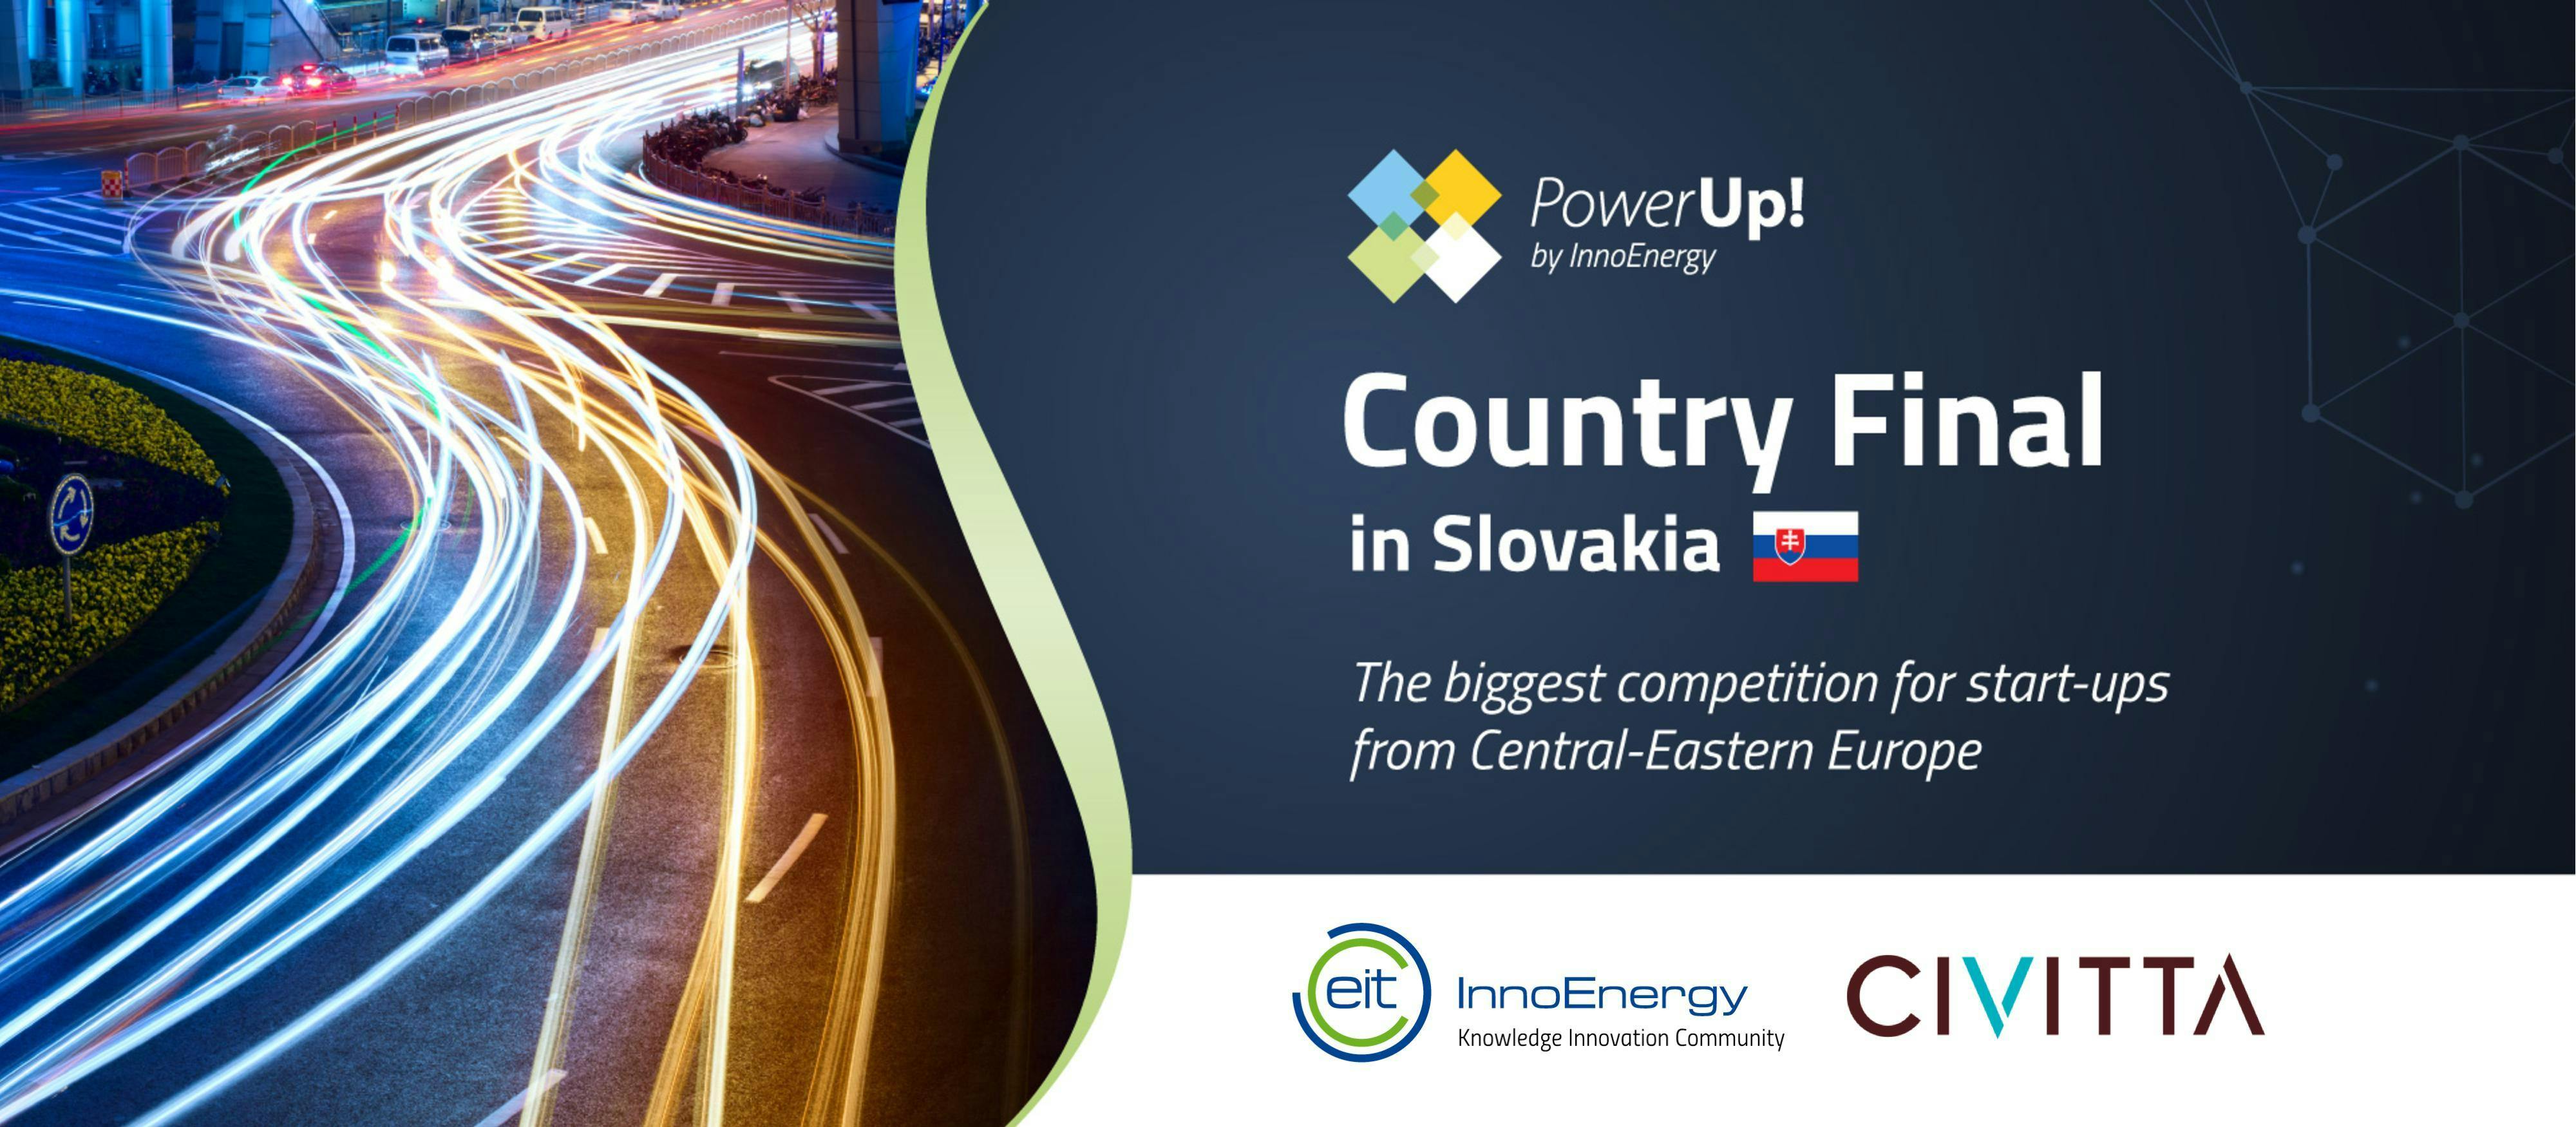 PowerUp! Country Final in Slovakia